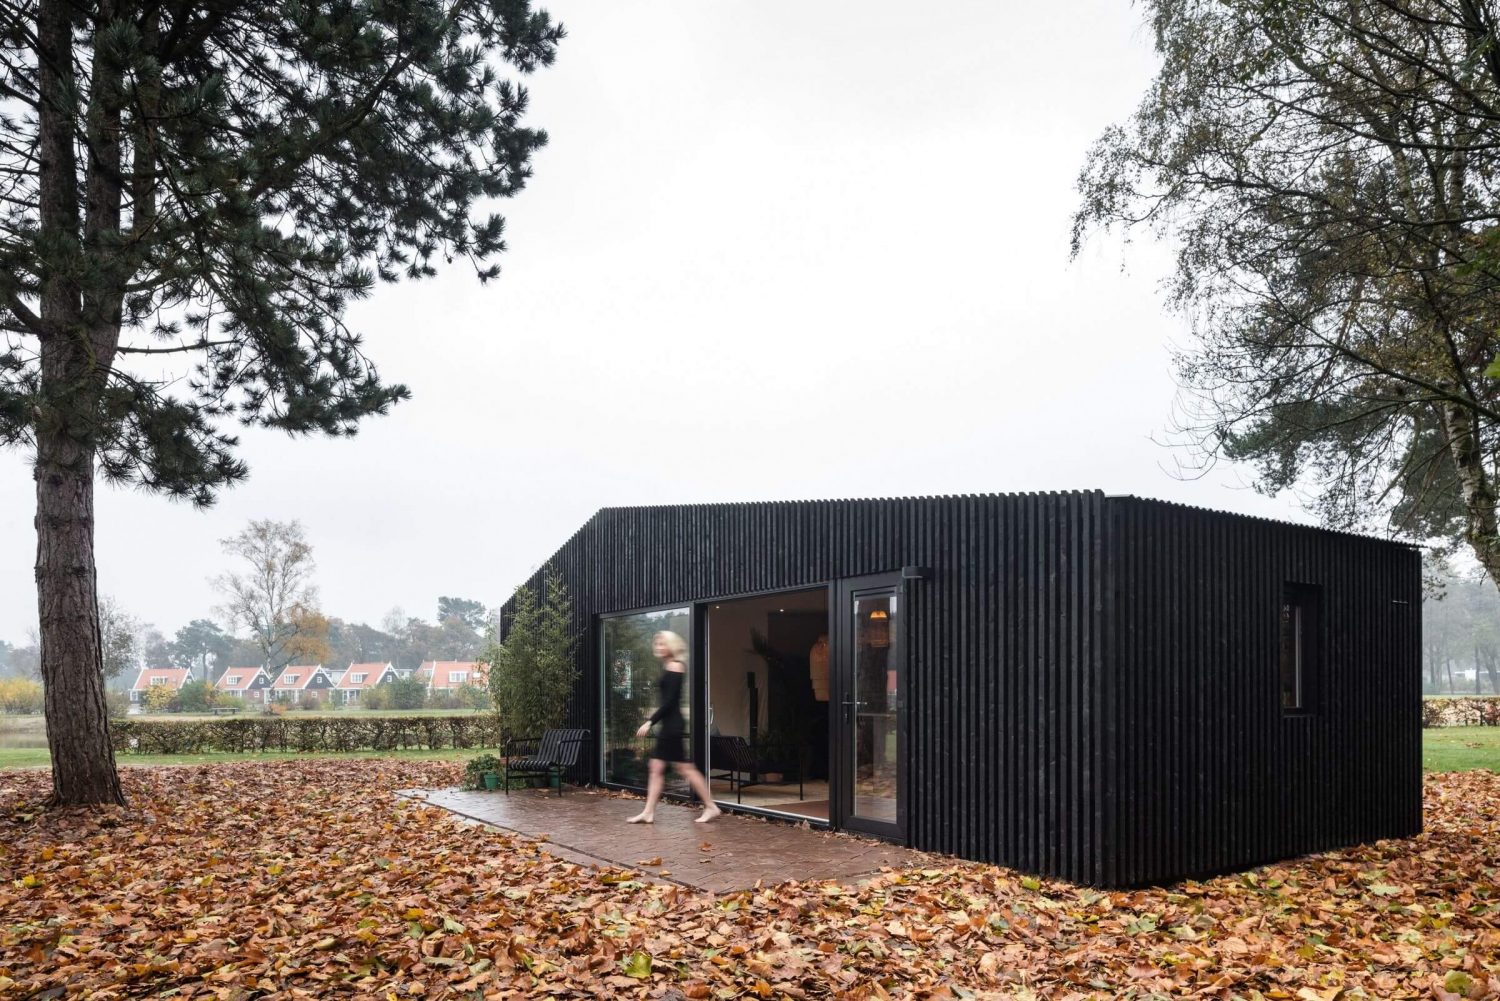 Buitenhuis by Chris Collaris Architects and Dutch Invertuals